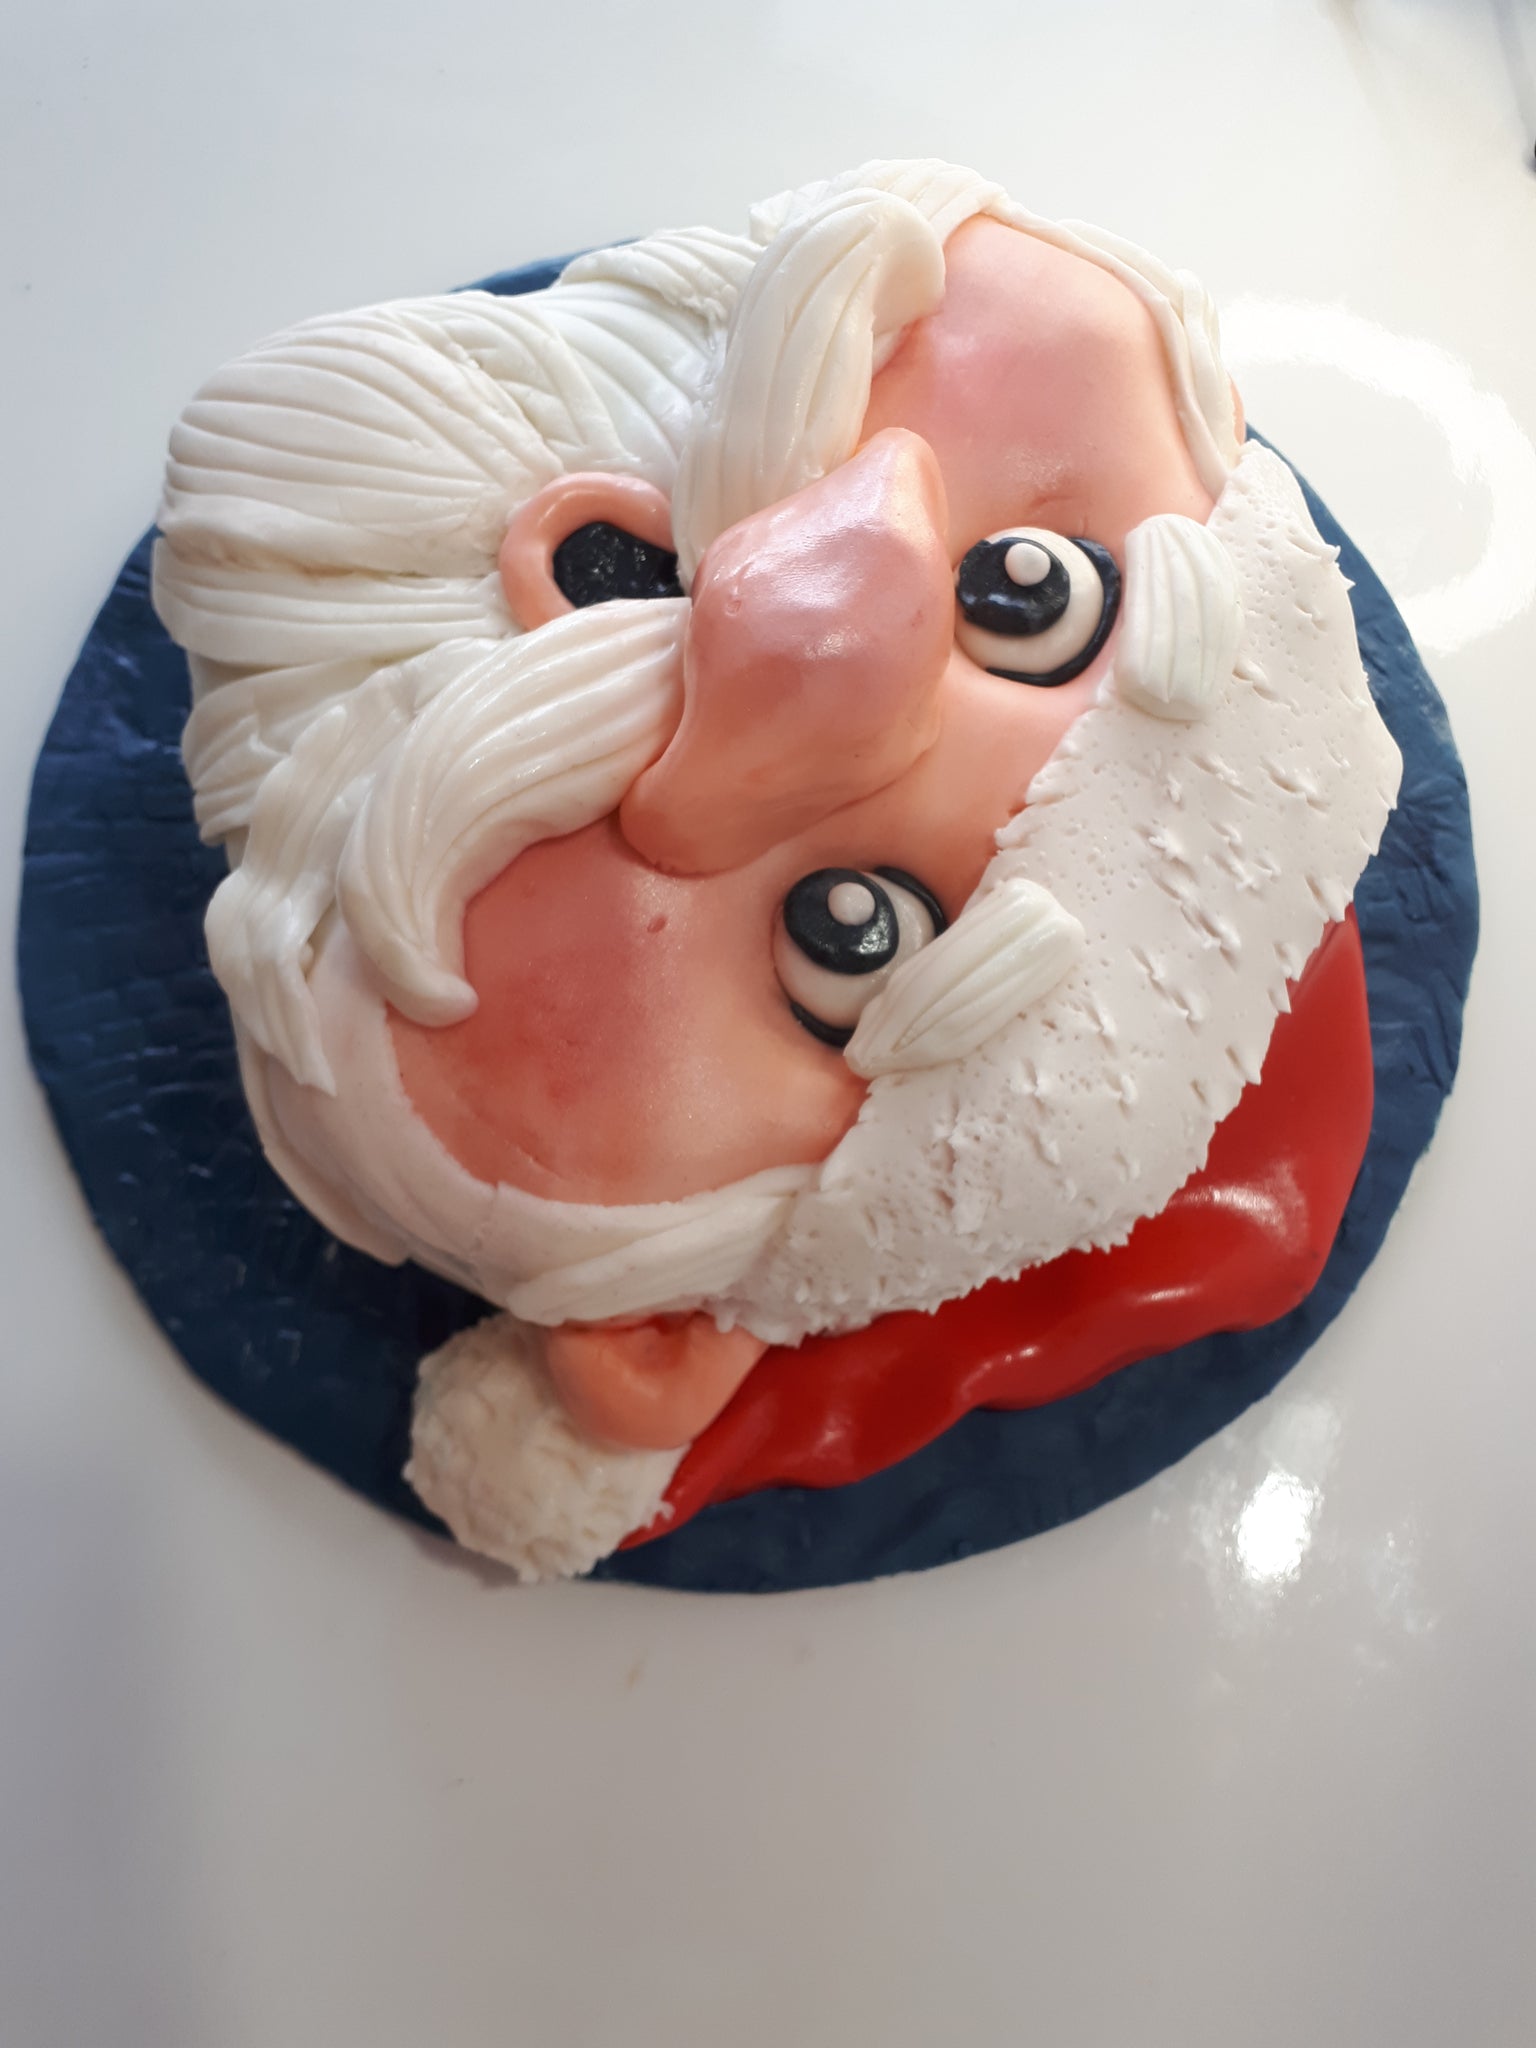 SANTA CLAUS CAKE | Christmas cake decorating has never been such fun! By:  Hai Nguyen Nice Cake | By MetDaan Cakes | Facebook